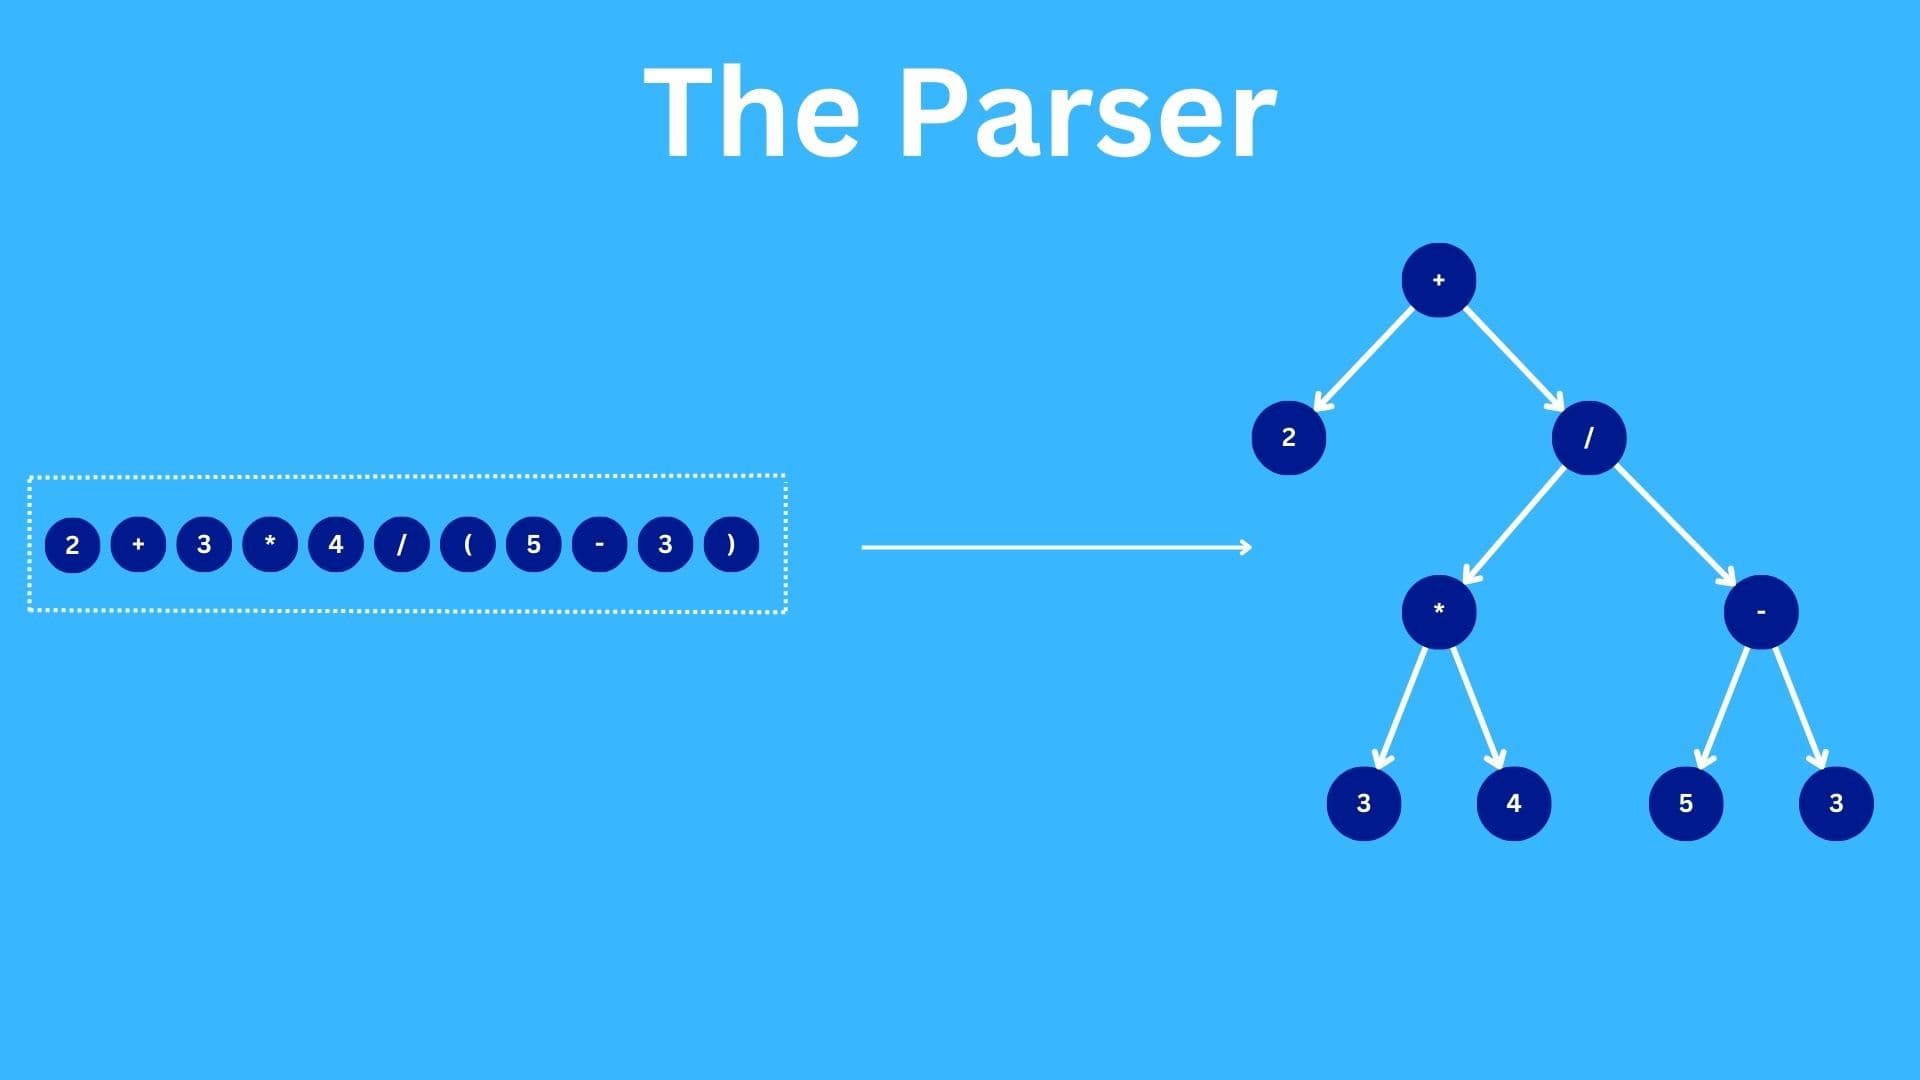 Creating a Programming Language - Part 3: The Parser